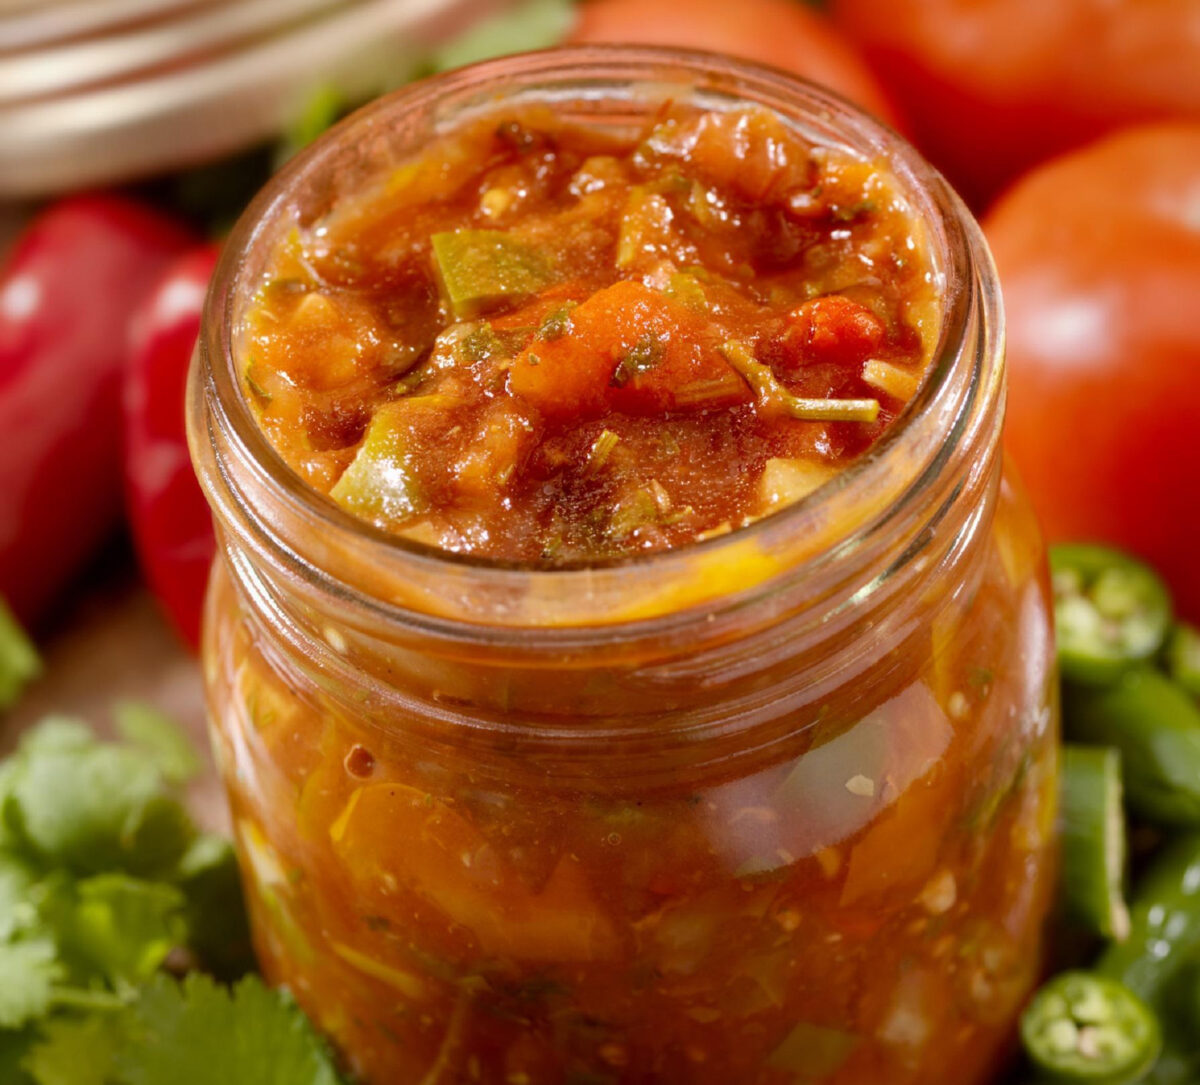 Roasted Garden Salsa. (Lauri Patterson/E+/Getty Images)